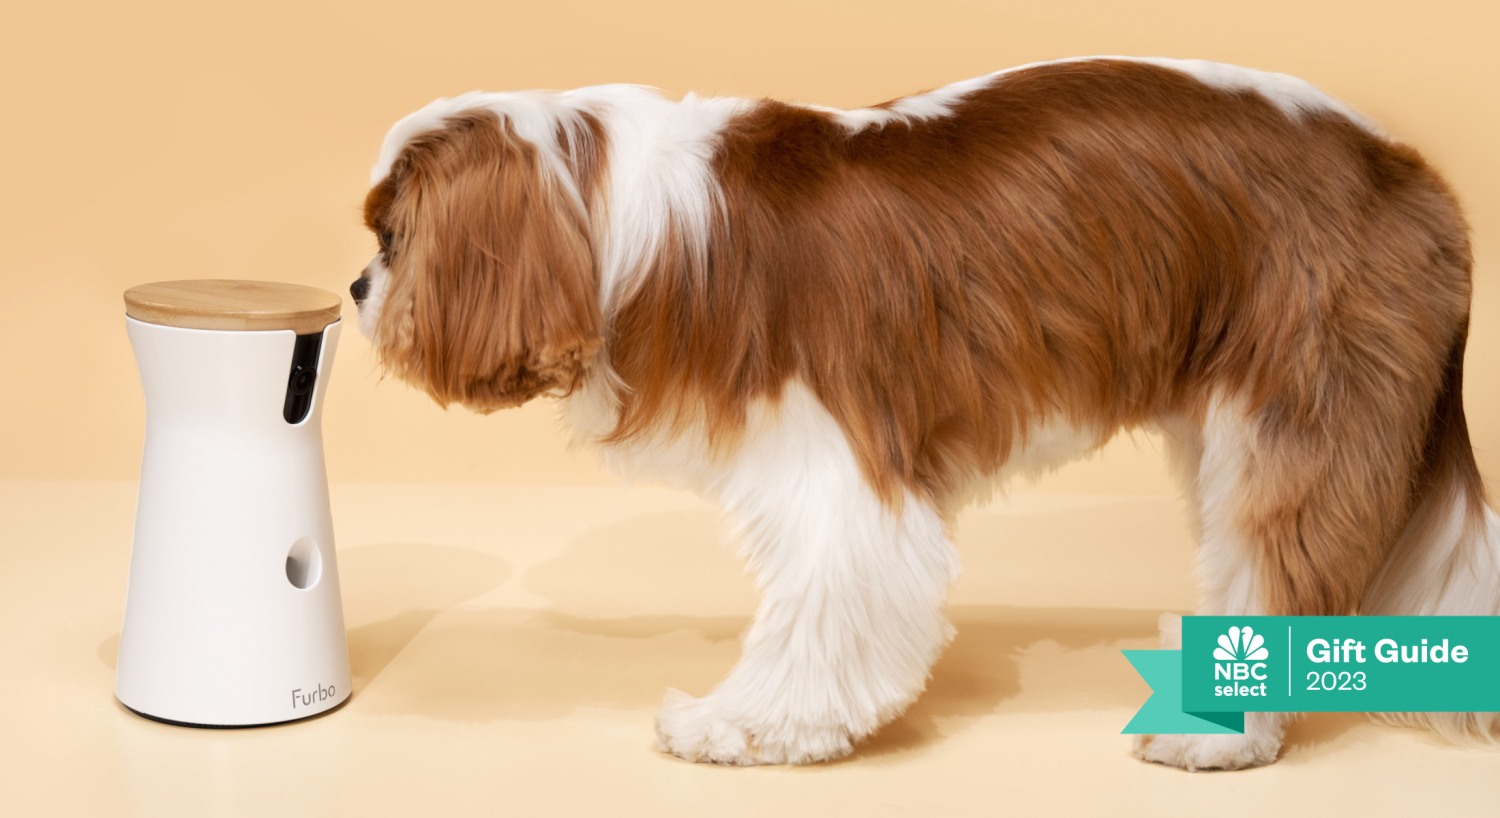 22 Best Pet Gifts - for Dogs, Cats, & More